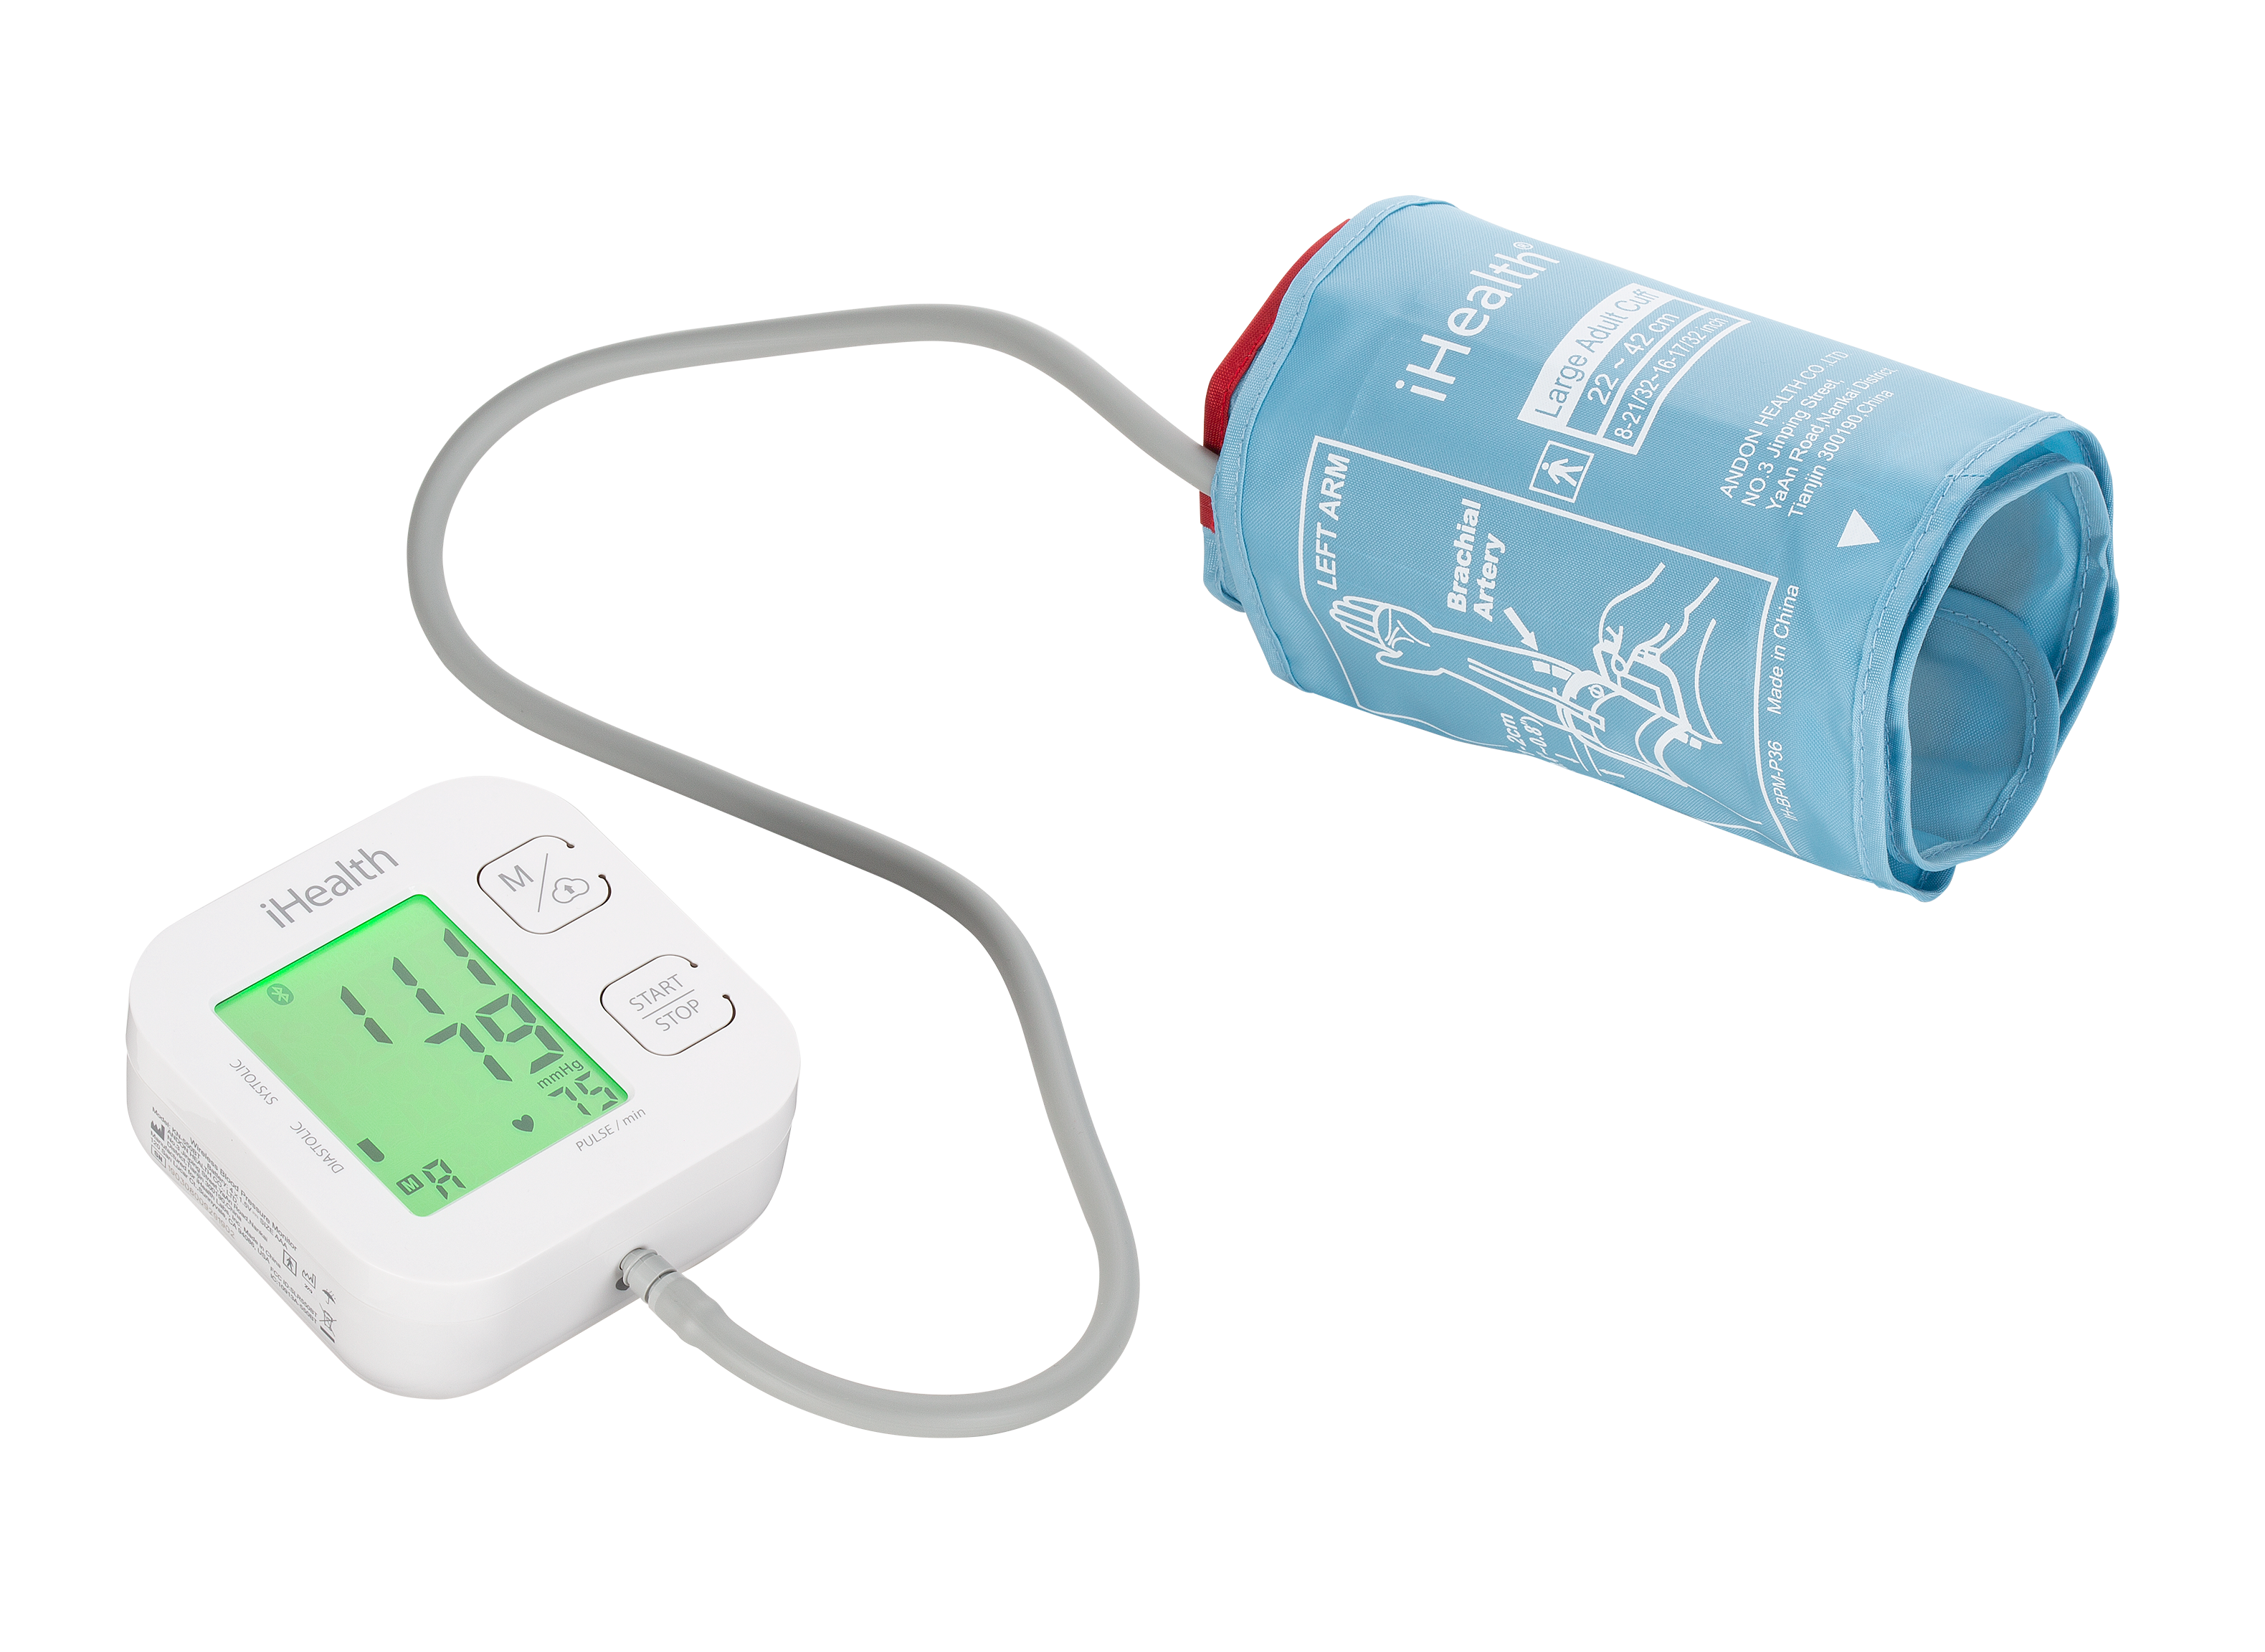 iHealth Track Wireless Upper Arm Blood Pressure Monitor with Wide